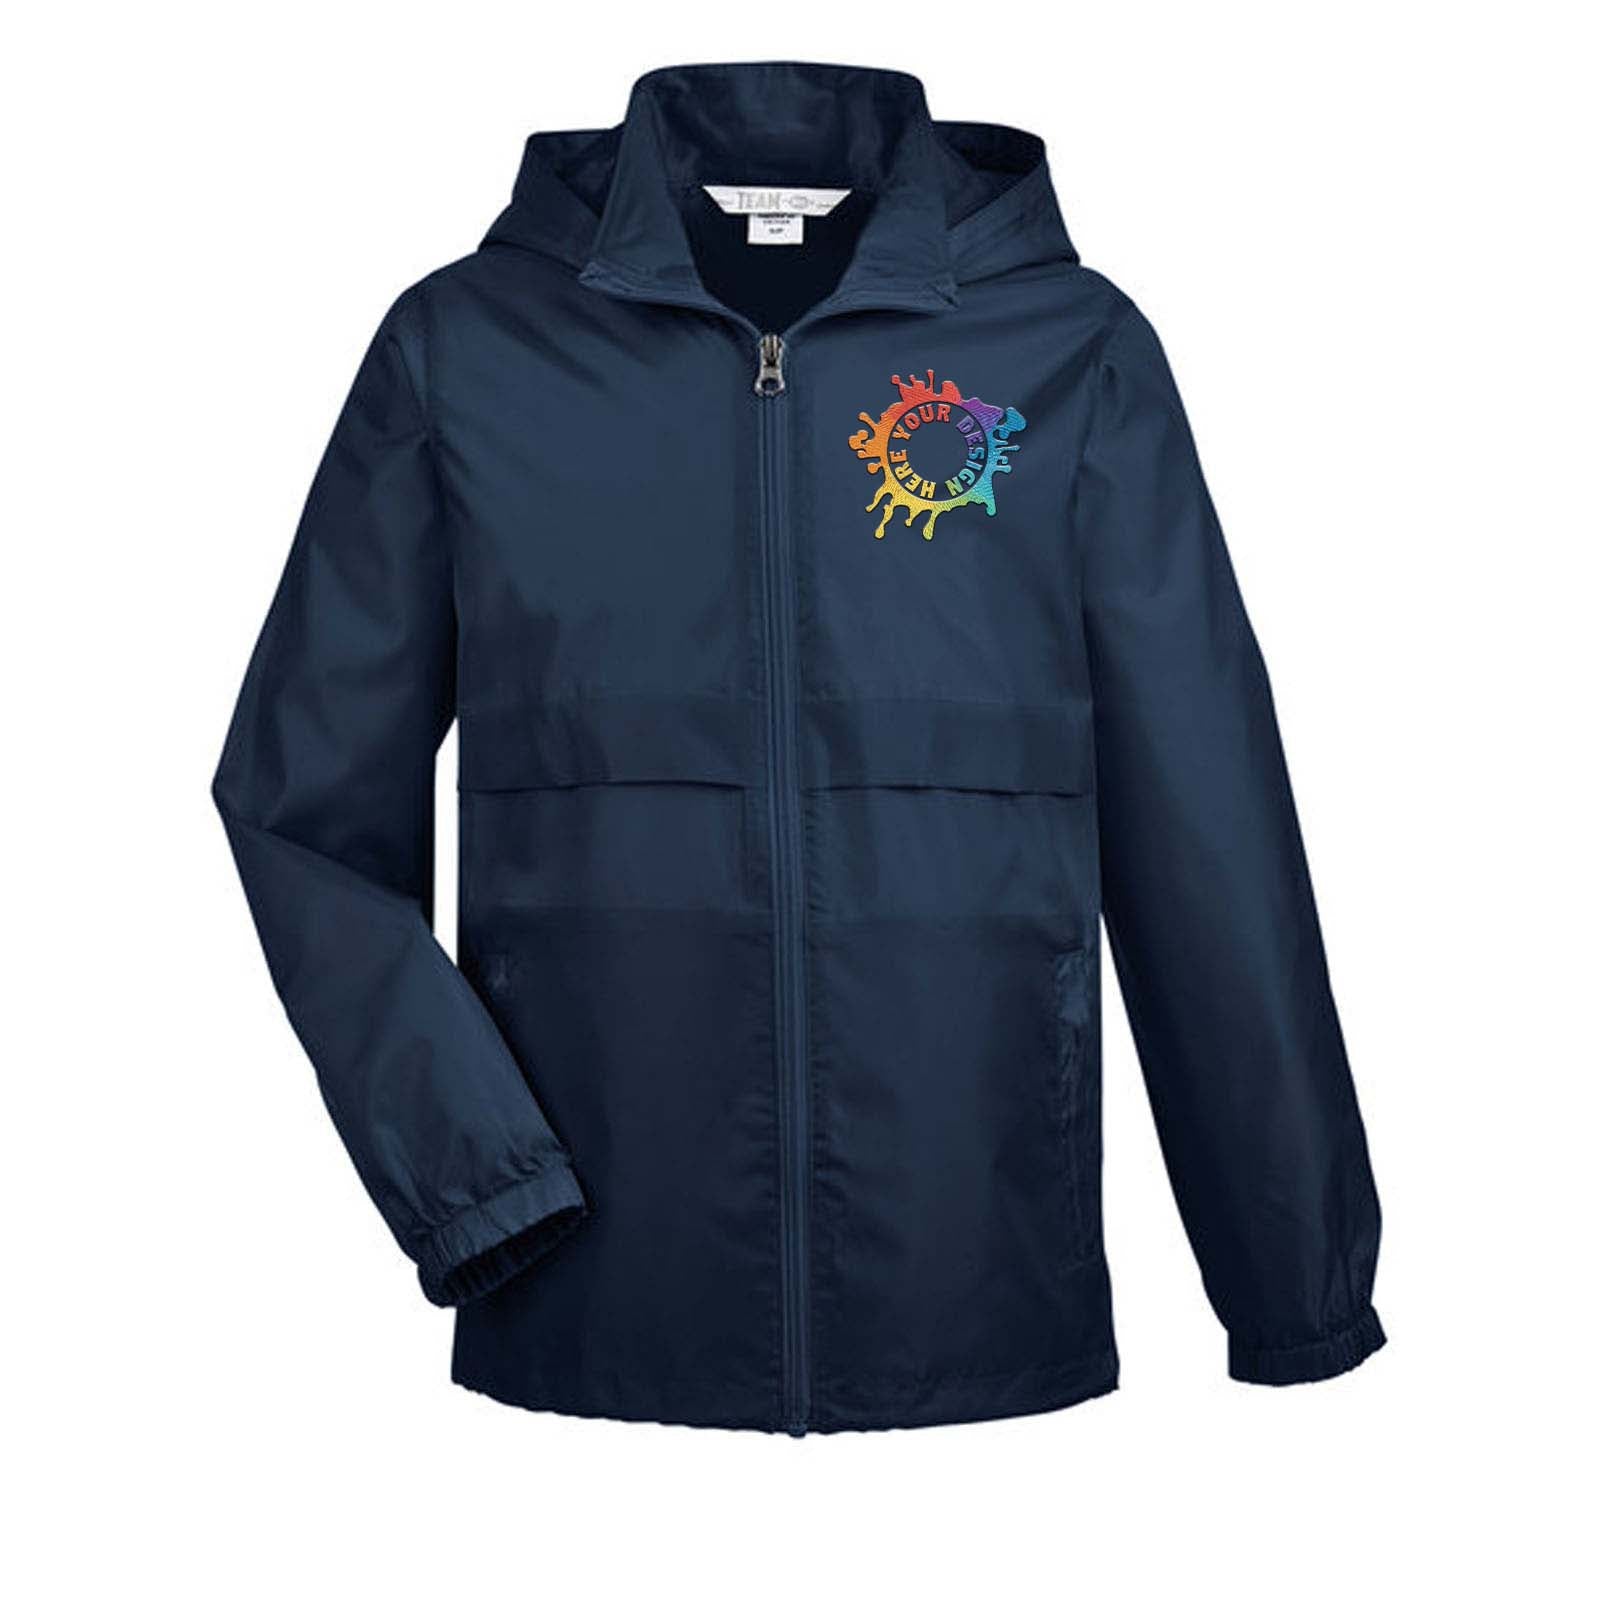 Team 365 Youth Zone Protect Lightweight Jacket Embroidery - Mato & Hash